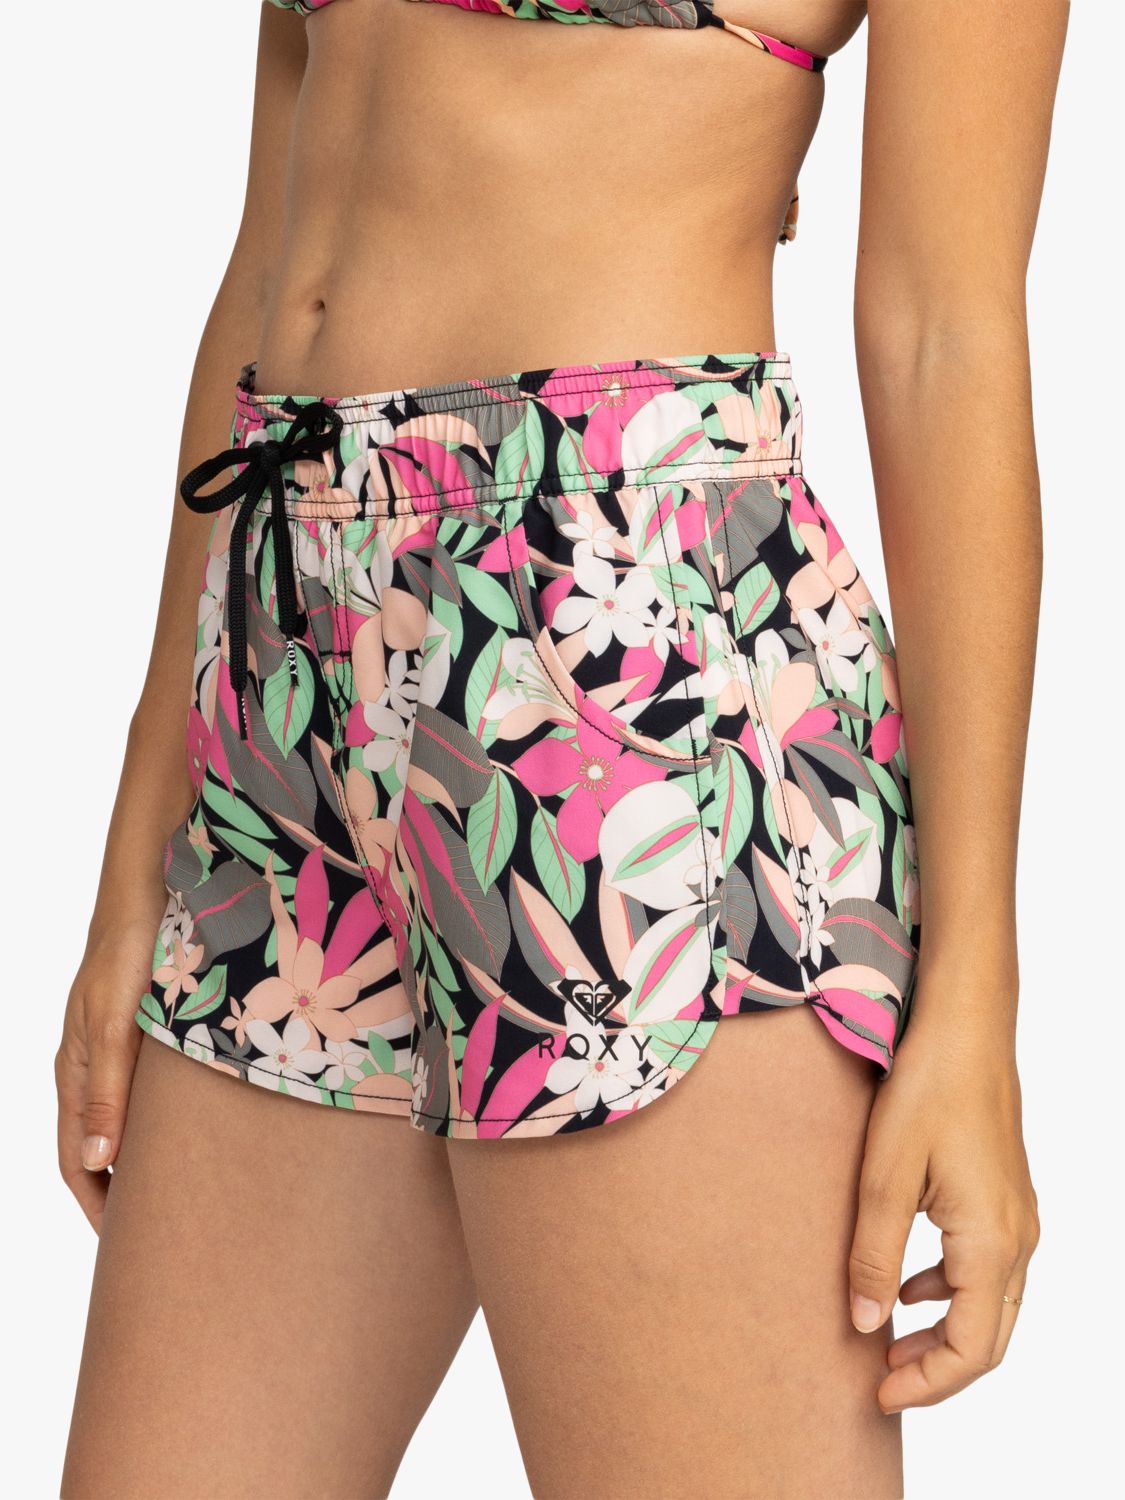 Buy Roxy Palm Print Wave Board Shorts, Anthracite/Multi Online at johnlewis.com